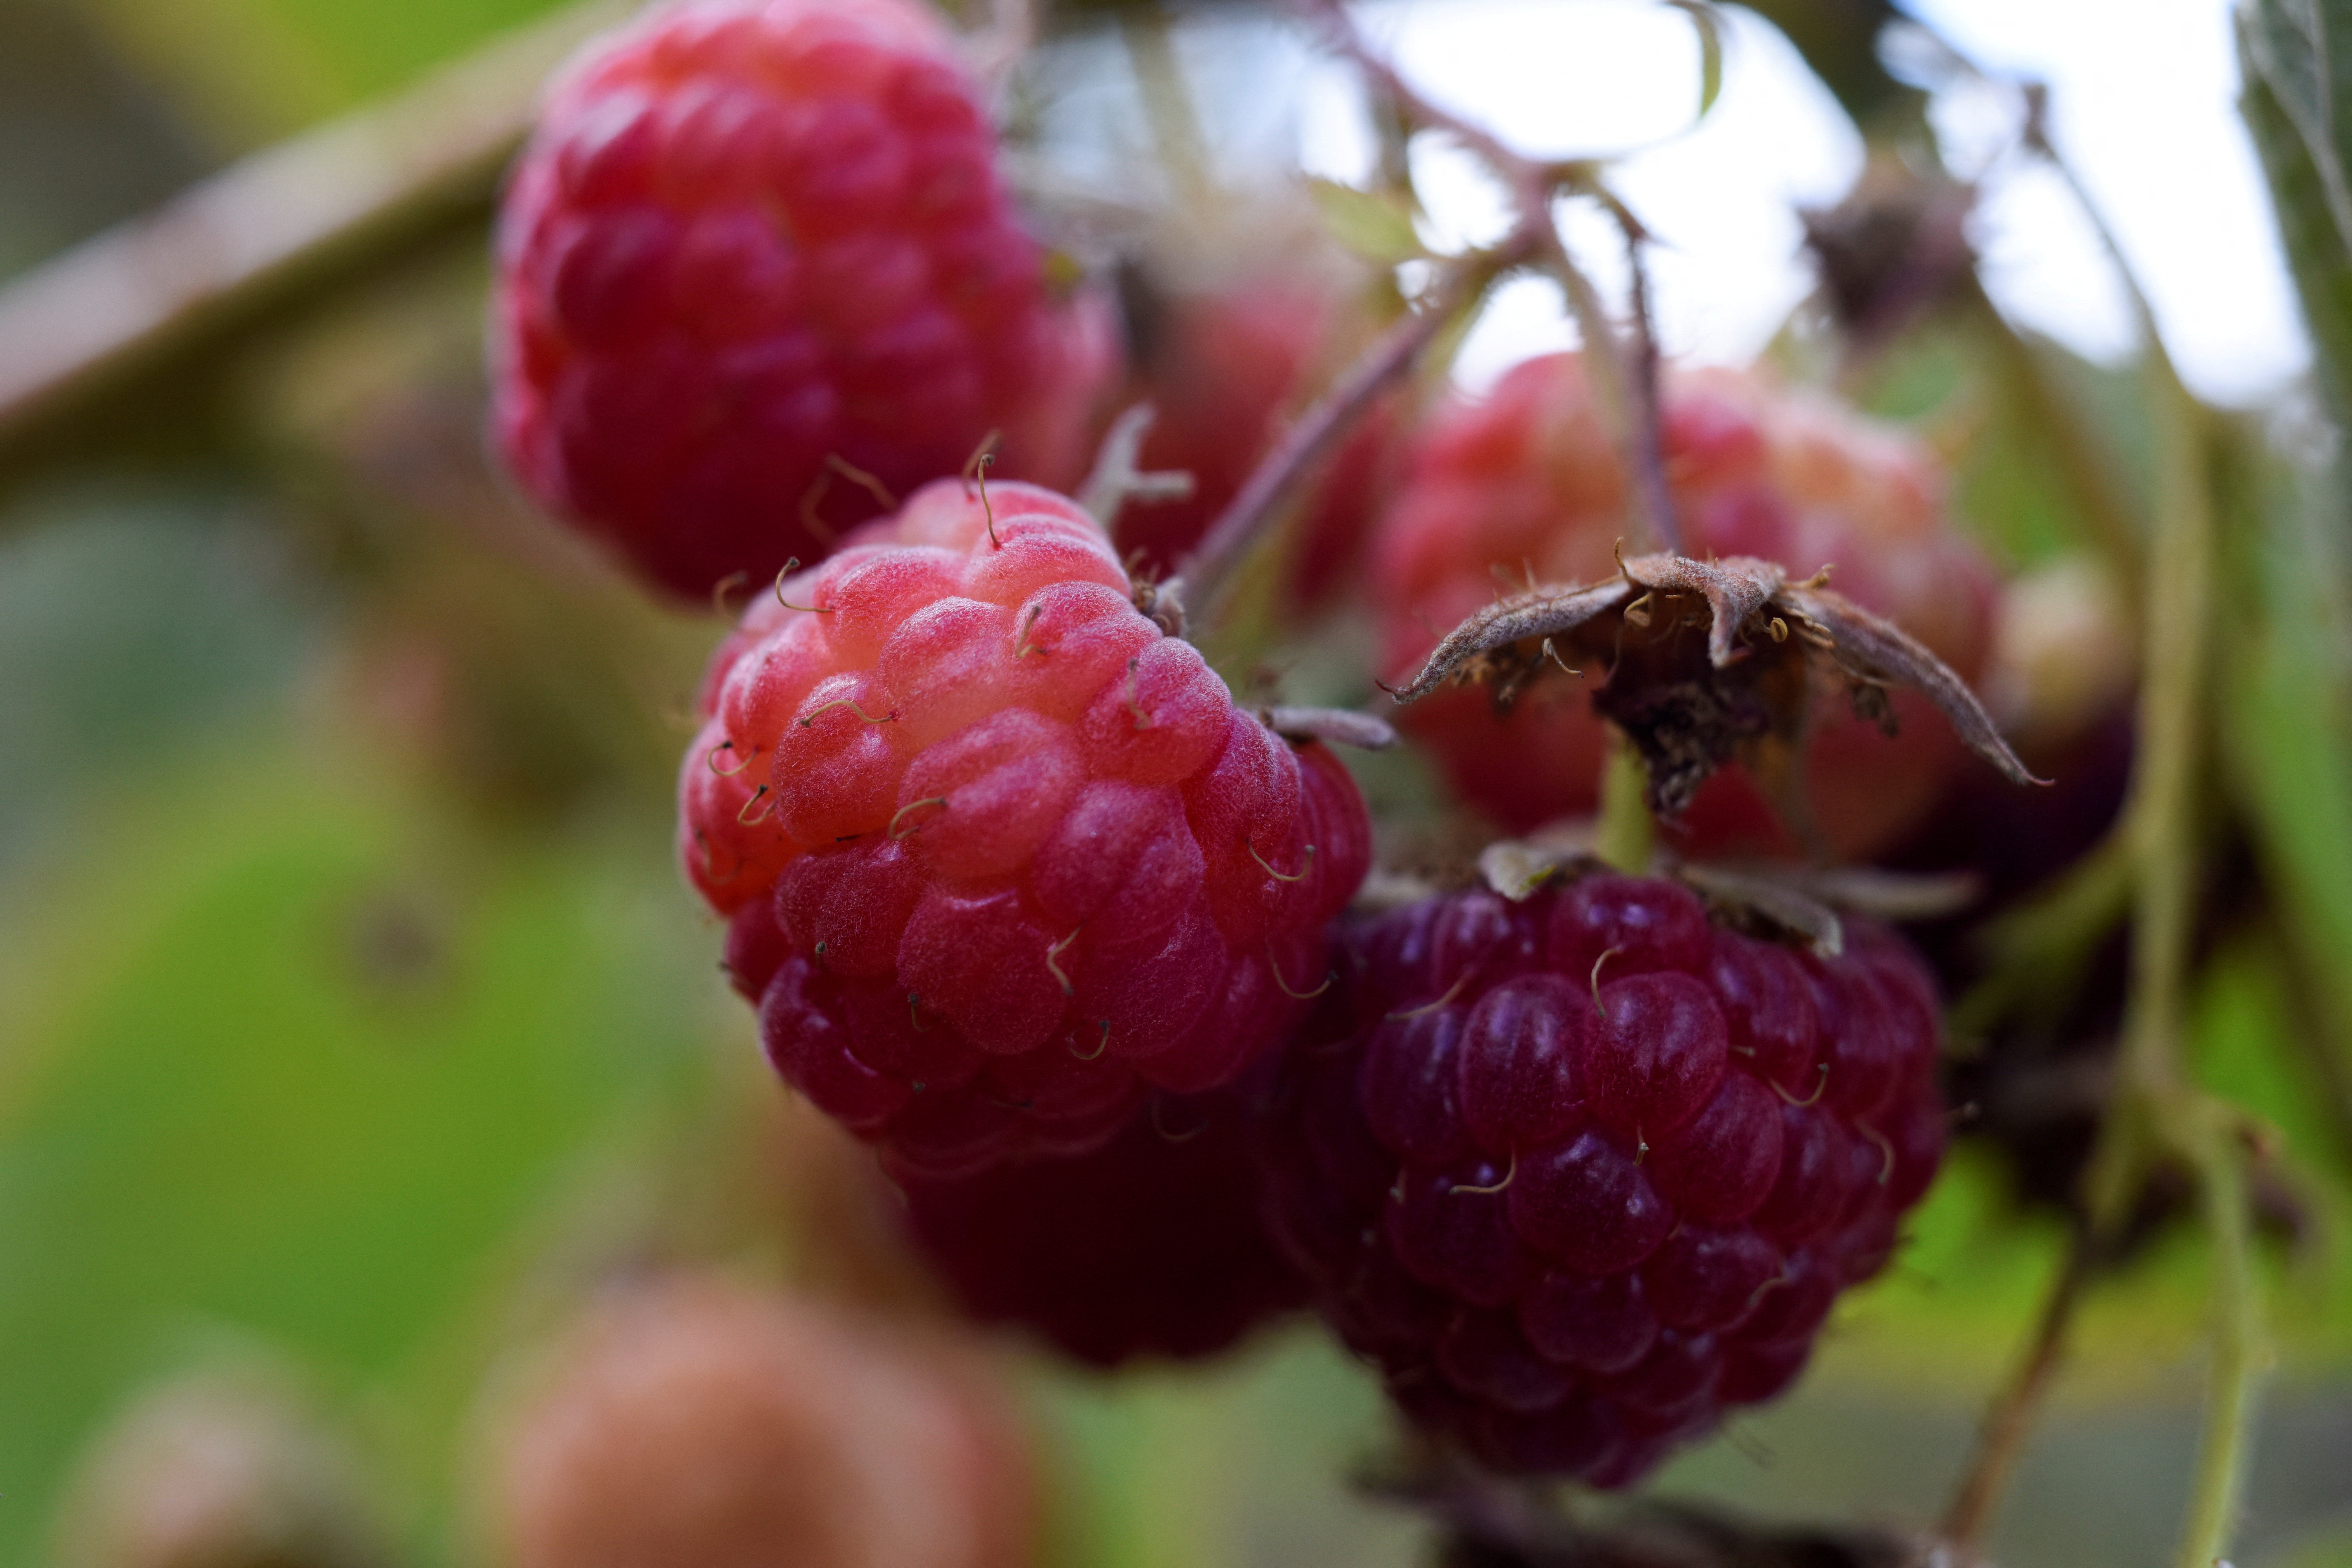 Raspberries are pictured during a harvest season at a farm in Chile